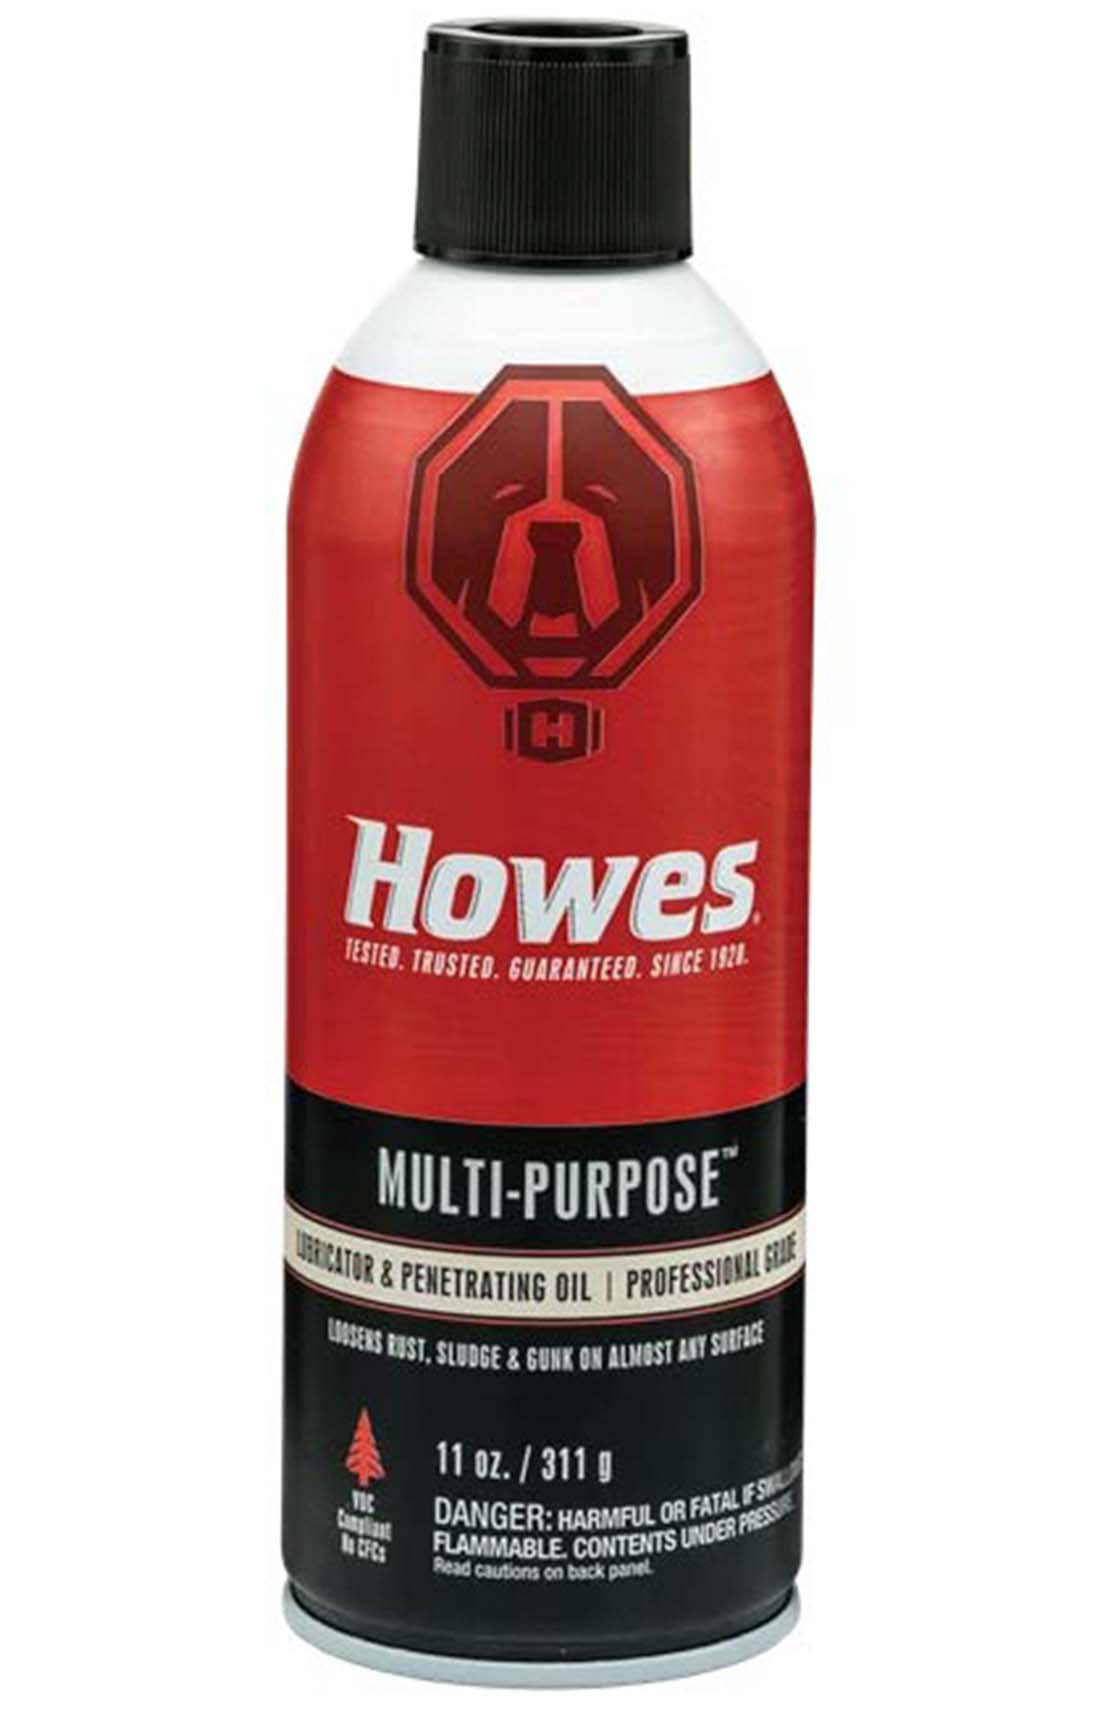 Howes Multi Purpse Lubricator and Penetrating Oil